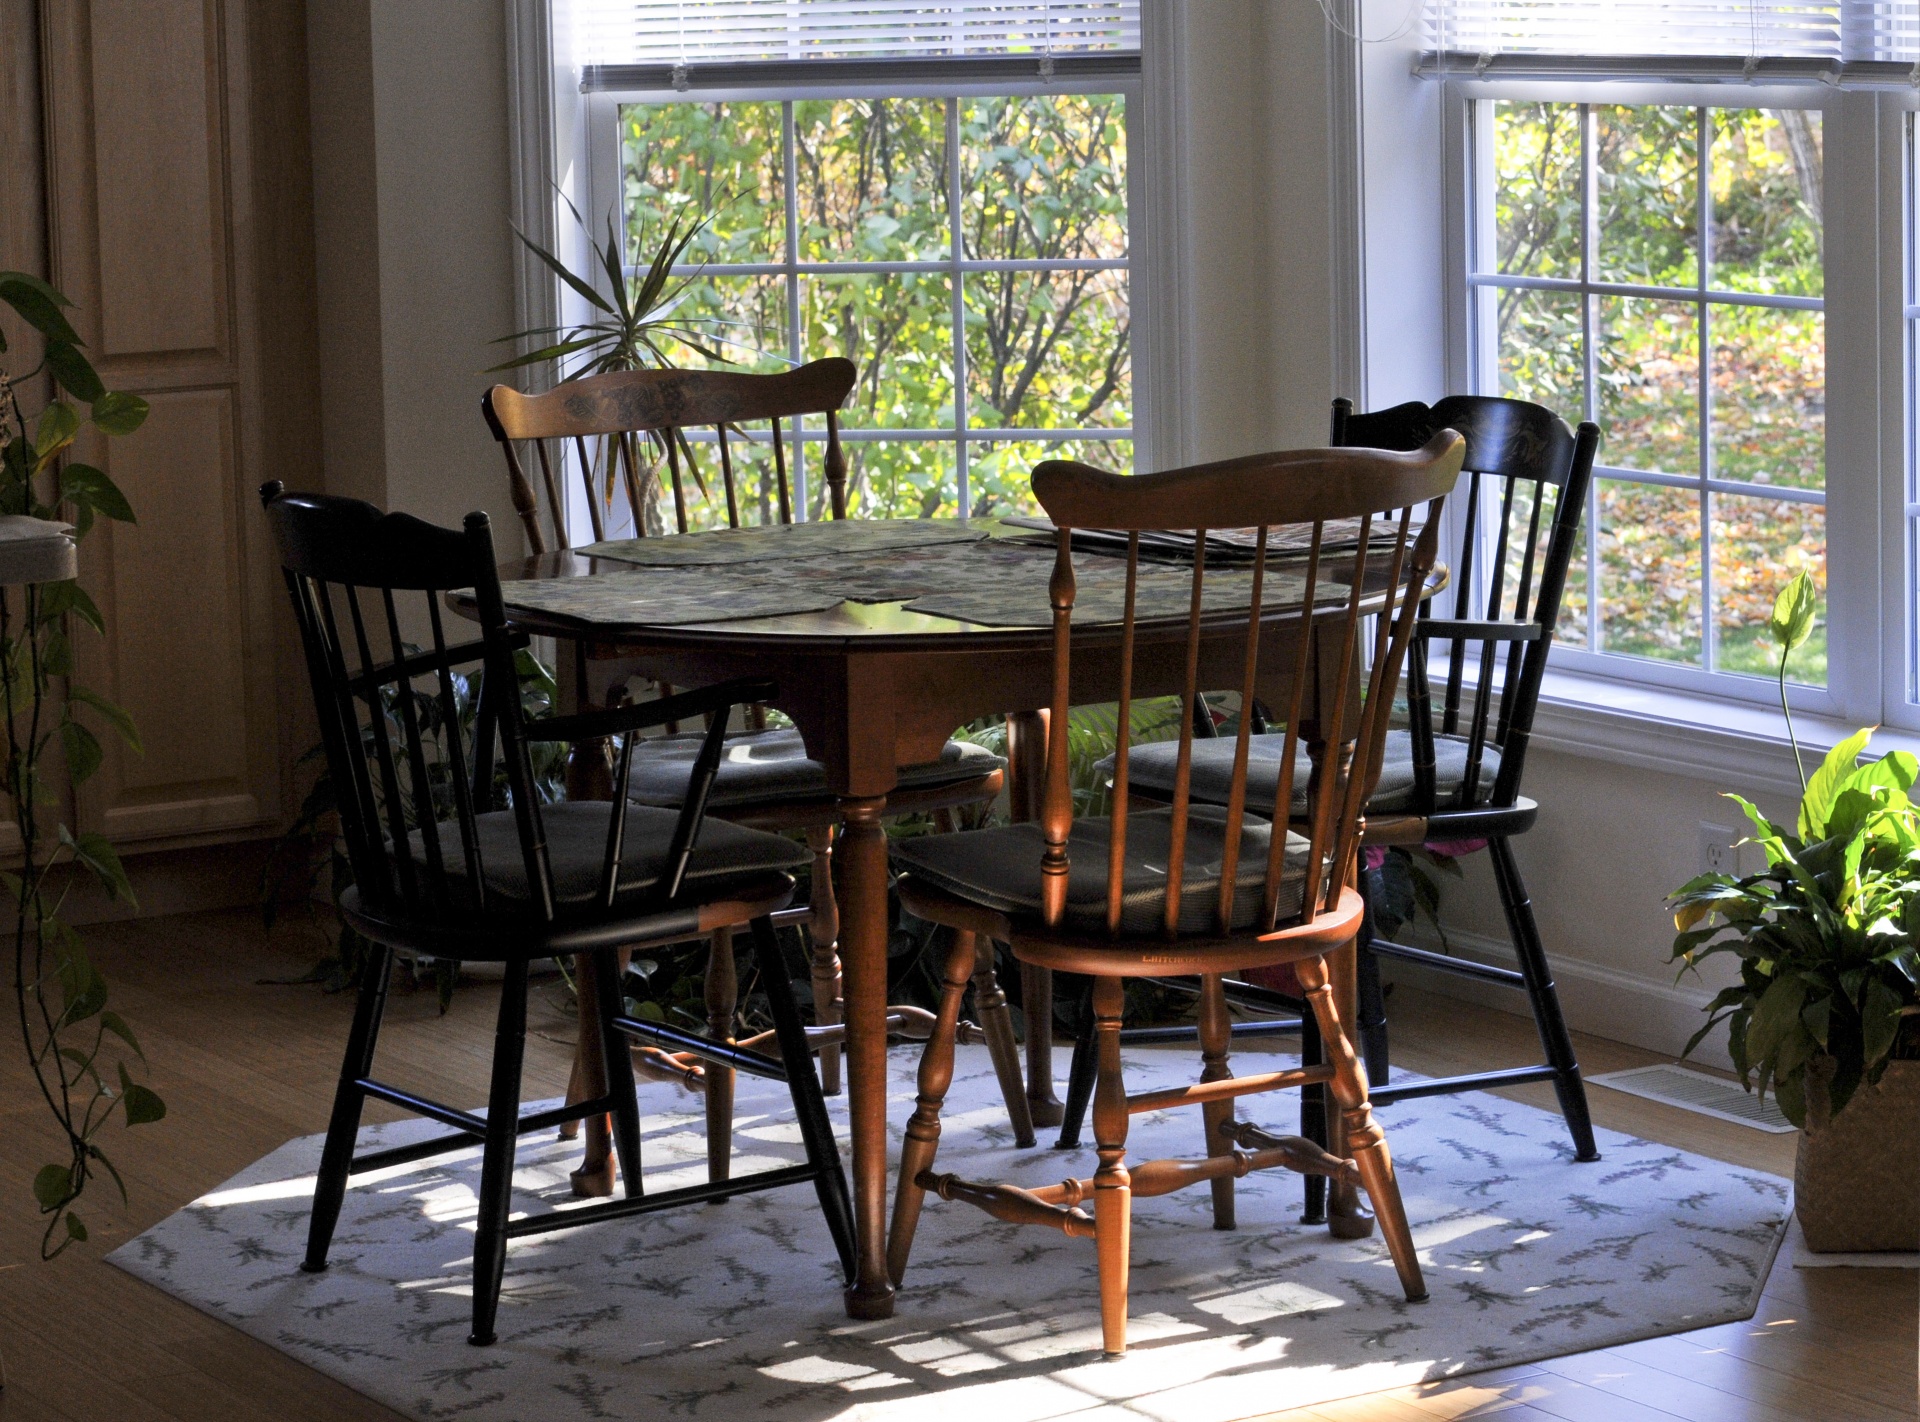 breakfast nook dining dining table free photo